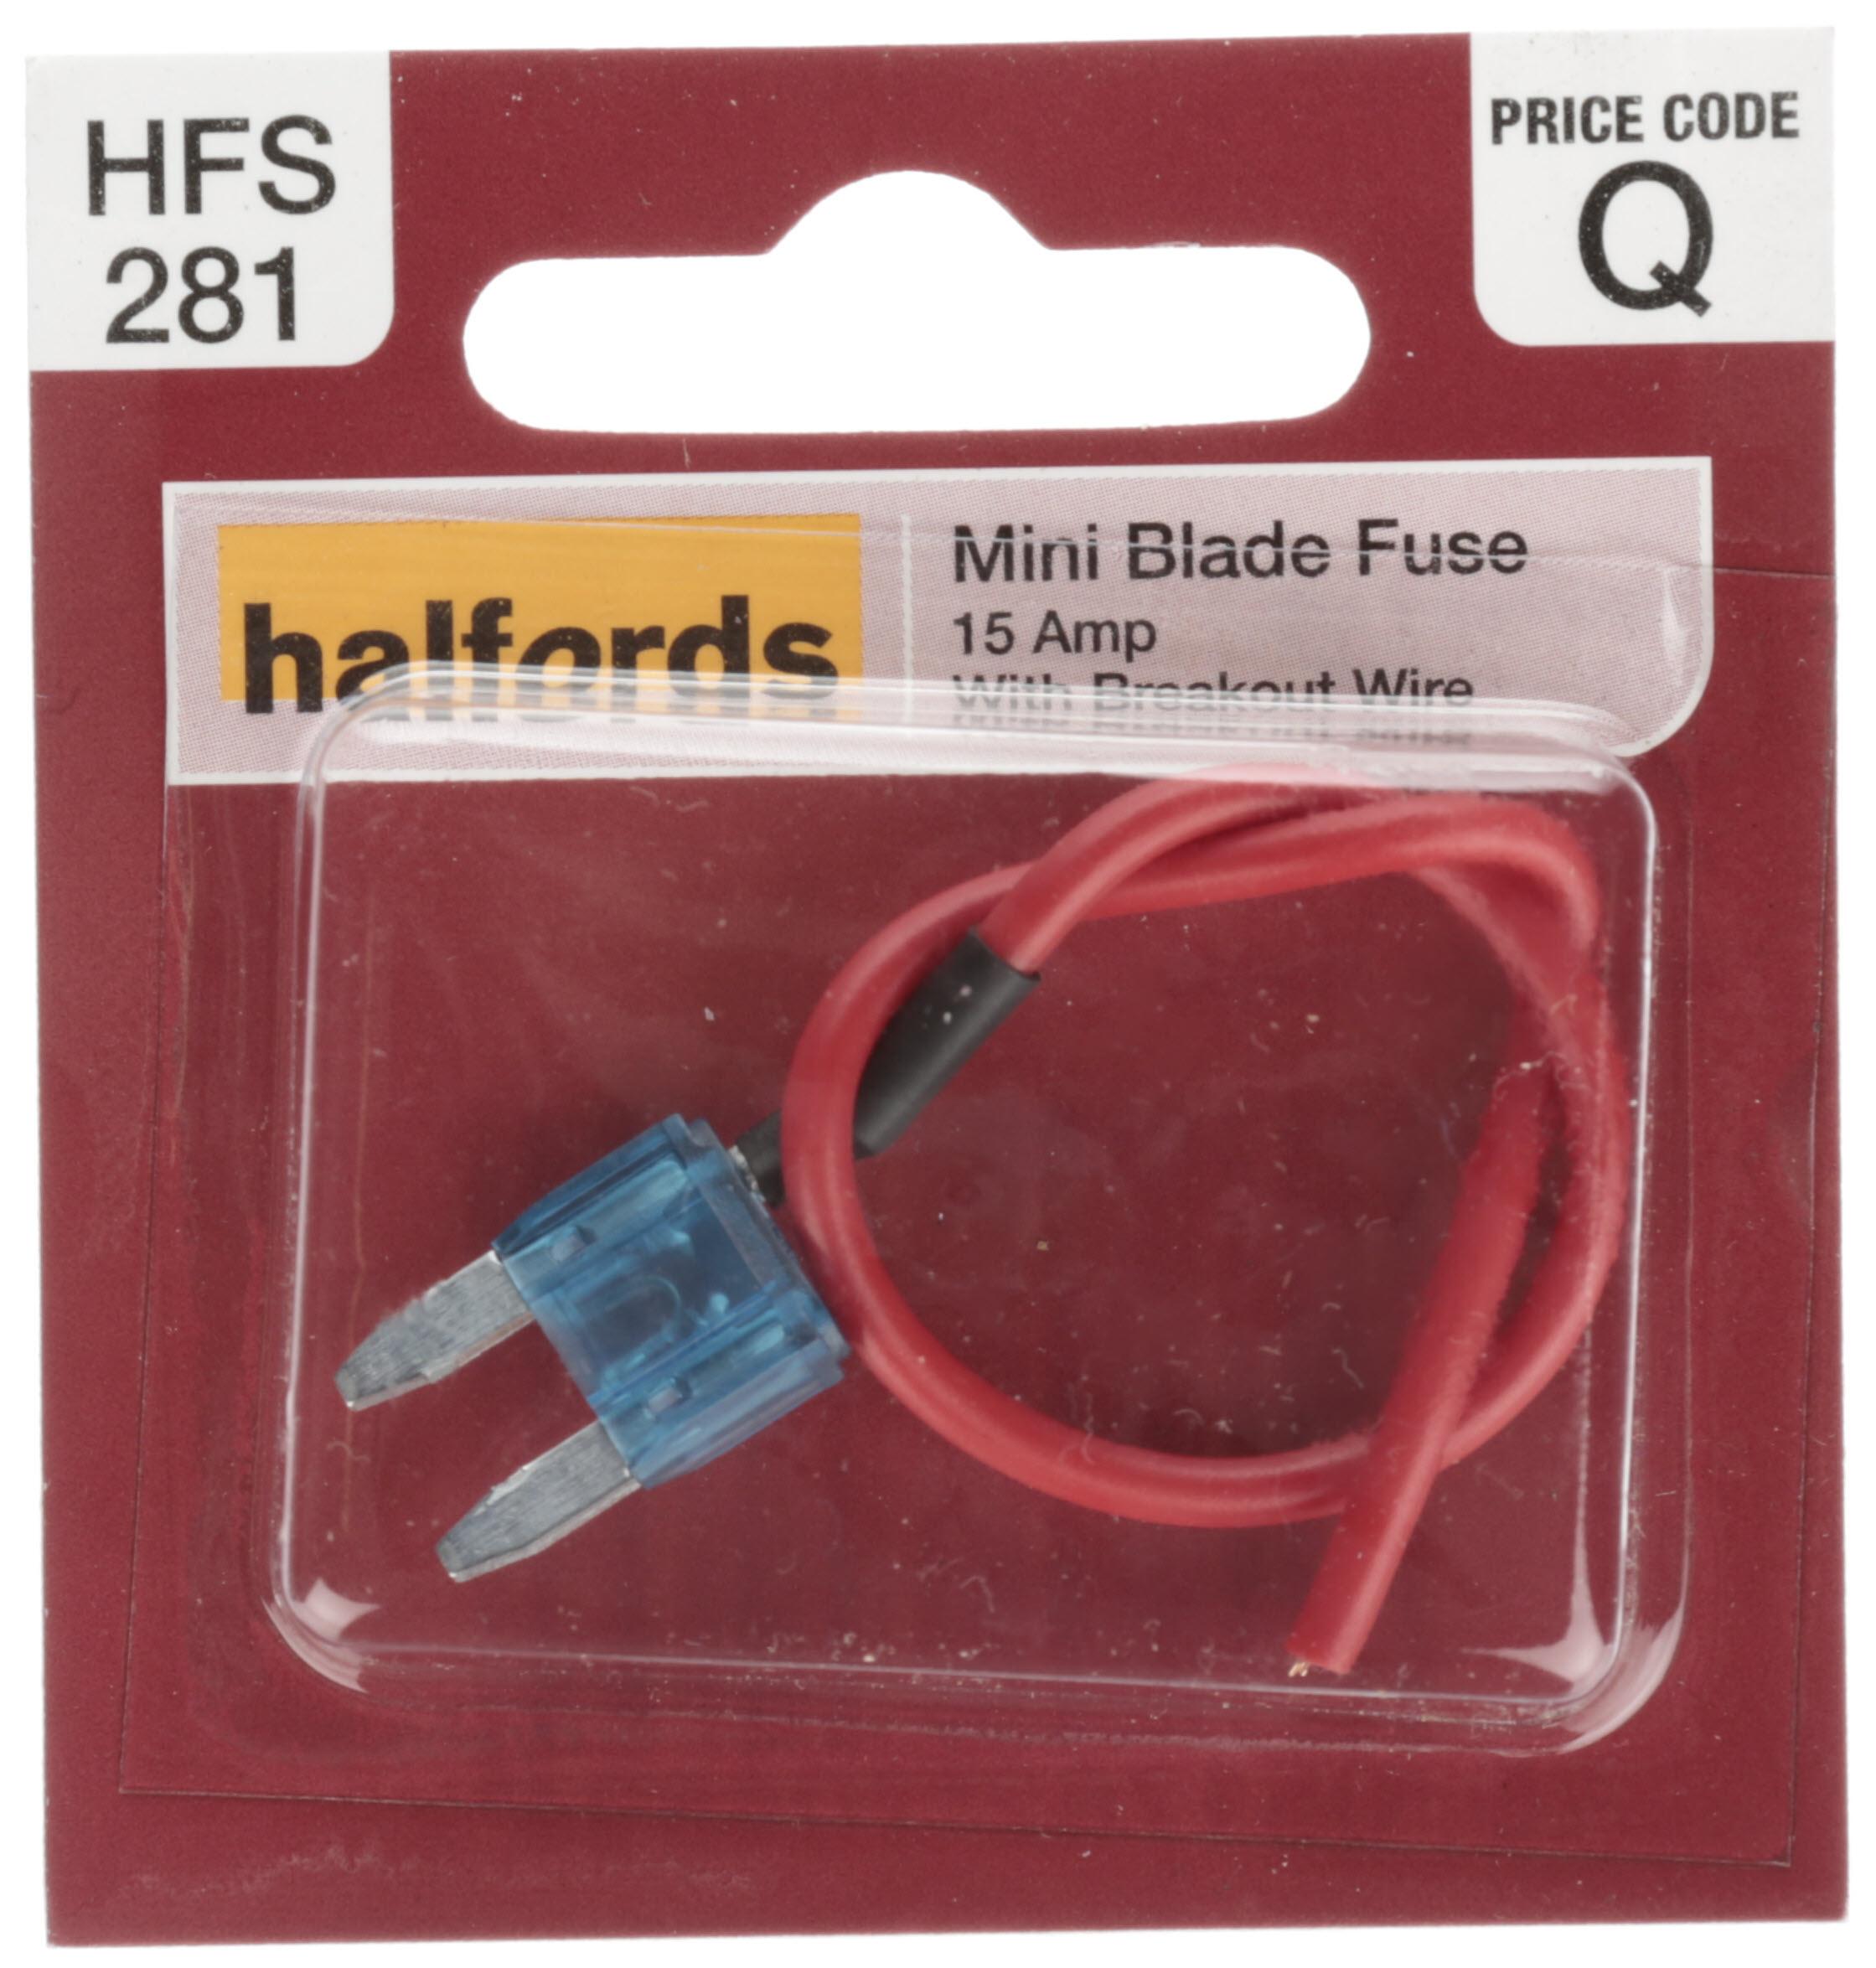 Halfords Mini Blade Fuse + Breakout Wire 15 Amp (Hfs281)